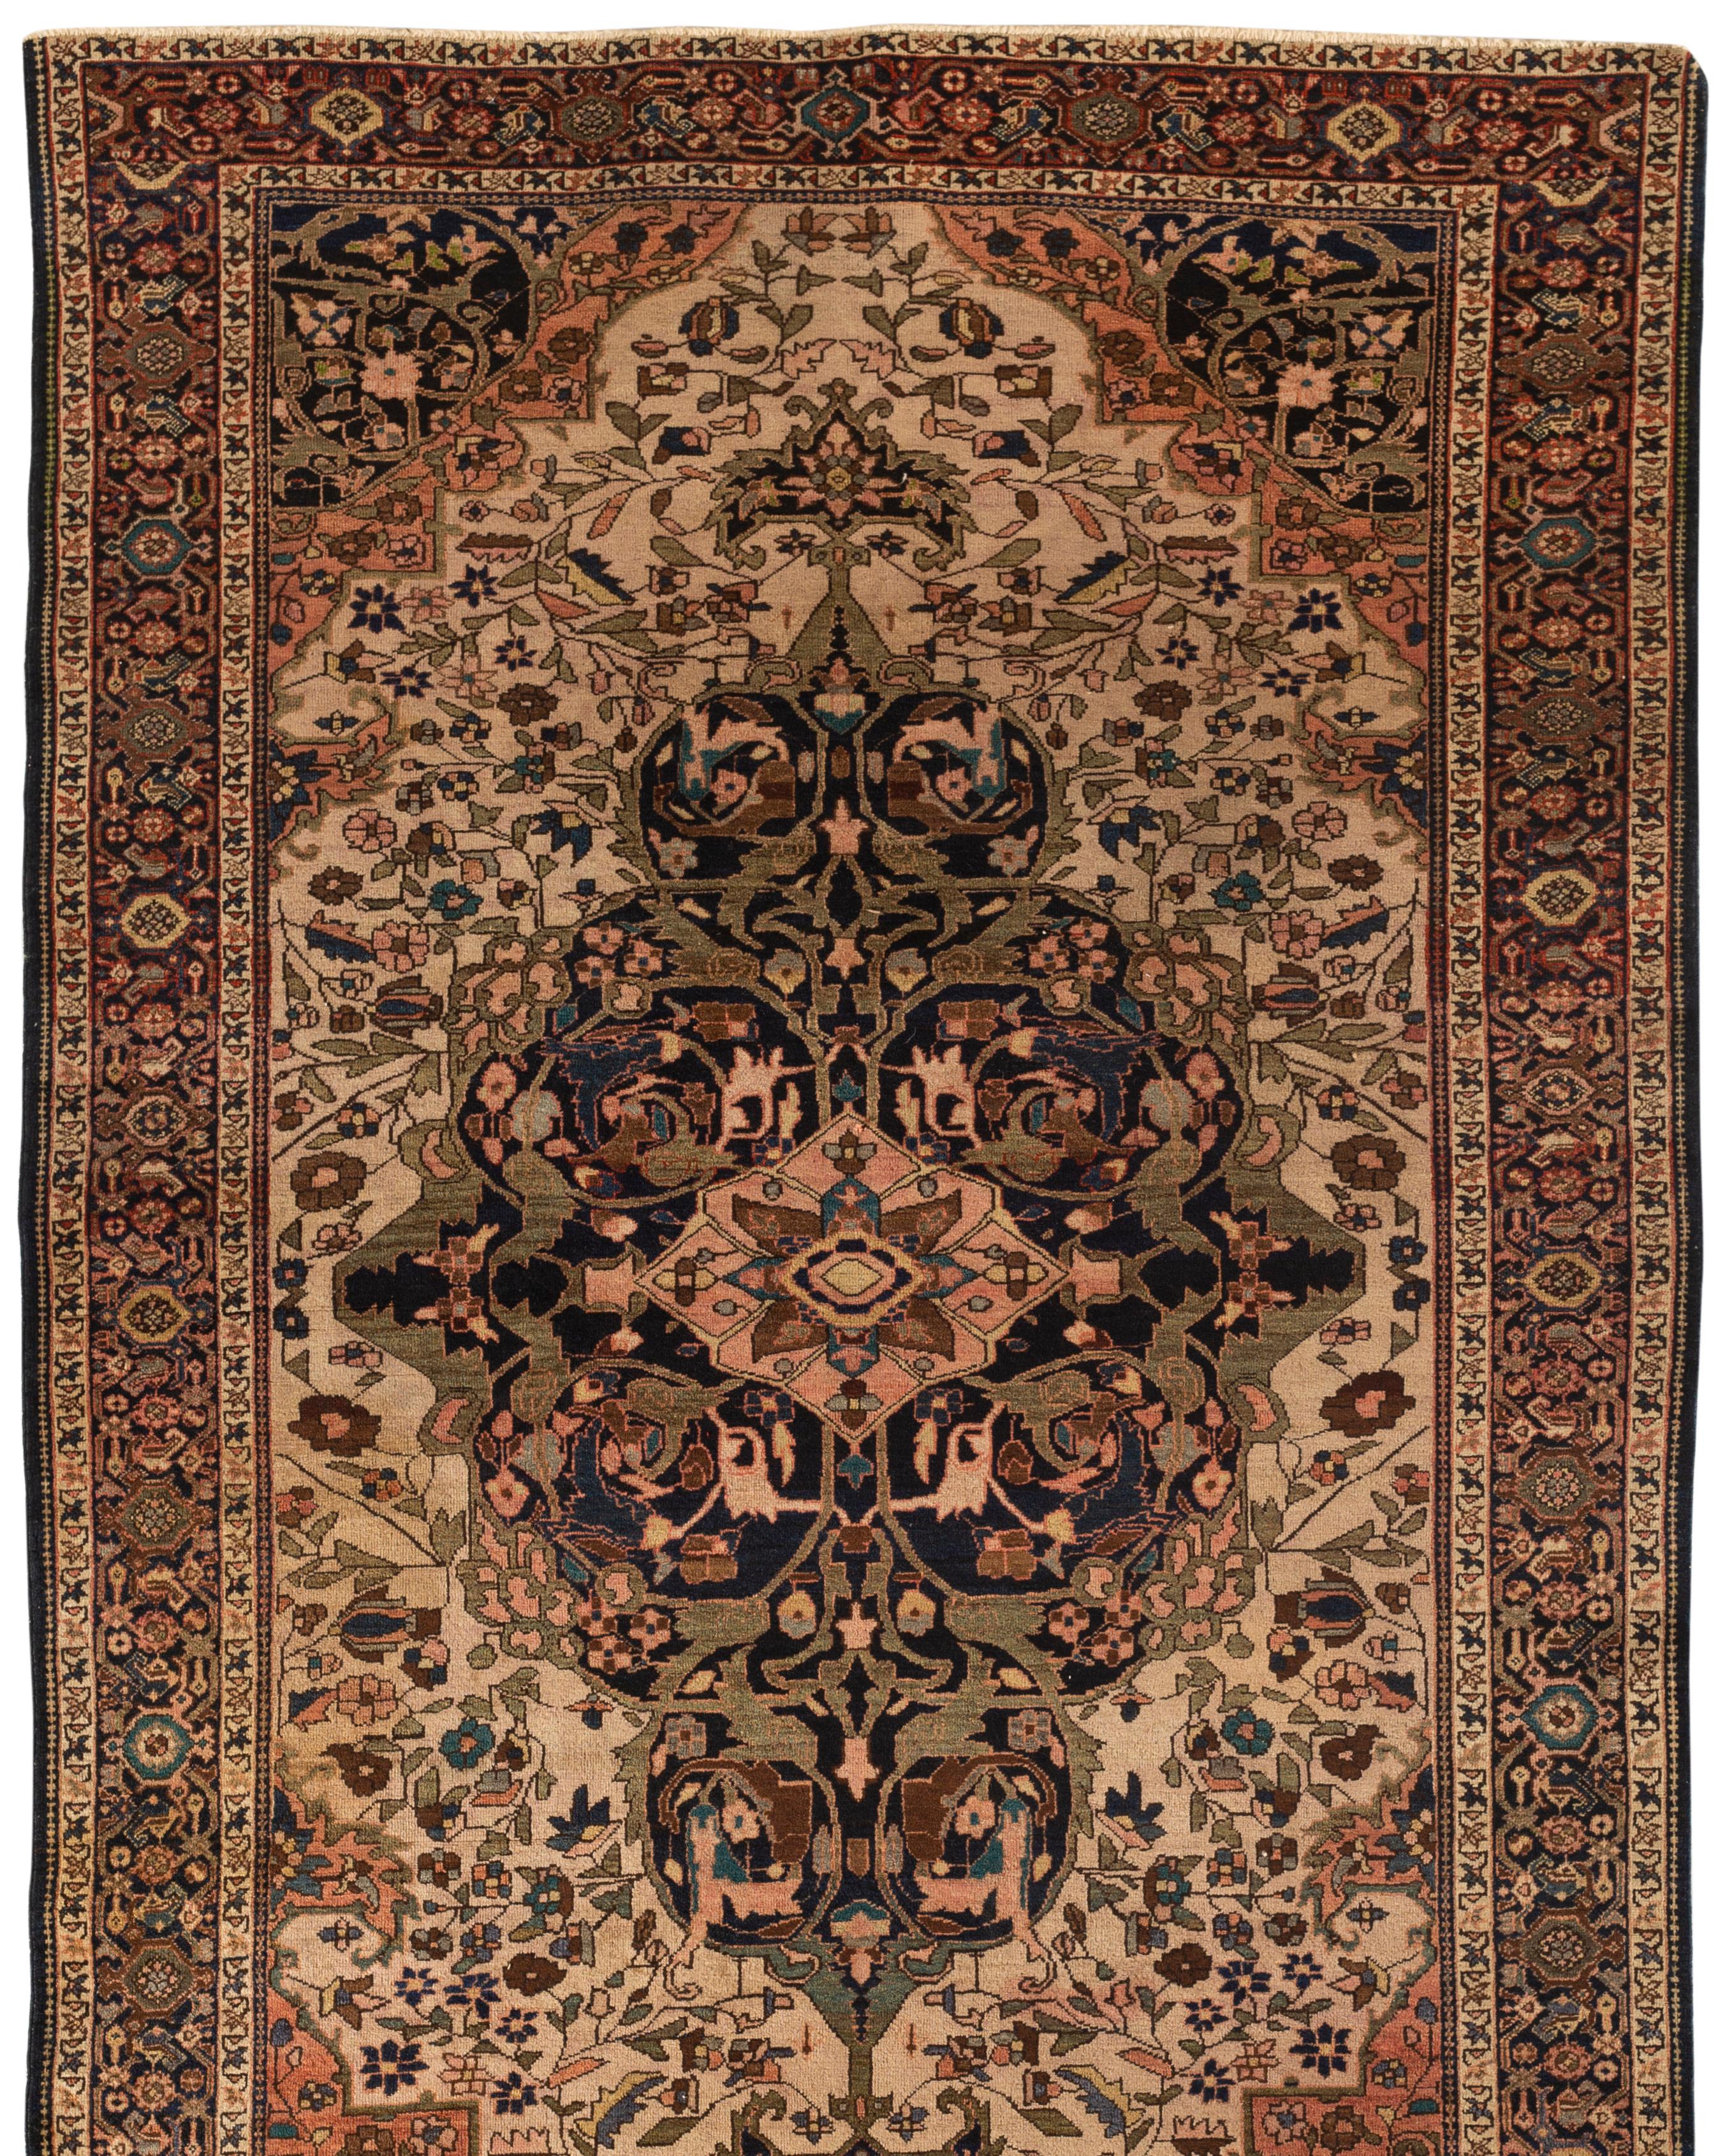 Antique Persian Farahan Sarouk rug, circa 1890. Sarouk rugs come from west central Persia. This attractive small rug has a soft ivory field surrounding a central medallion in navy, blues and soft rose all enclosed within a navy main border creating